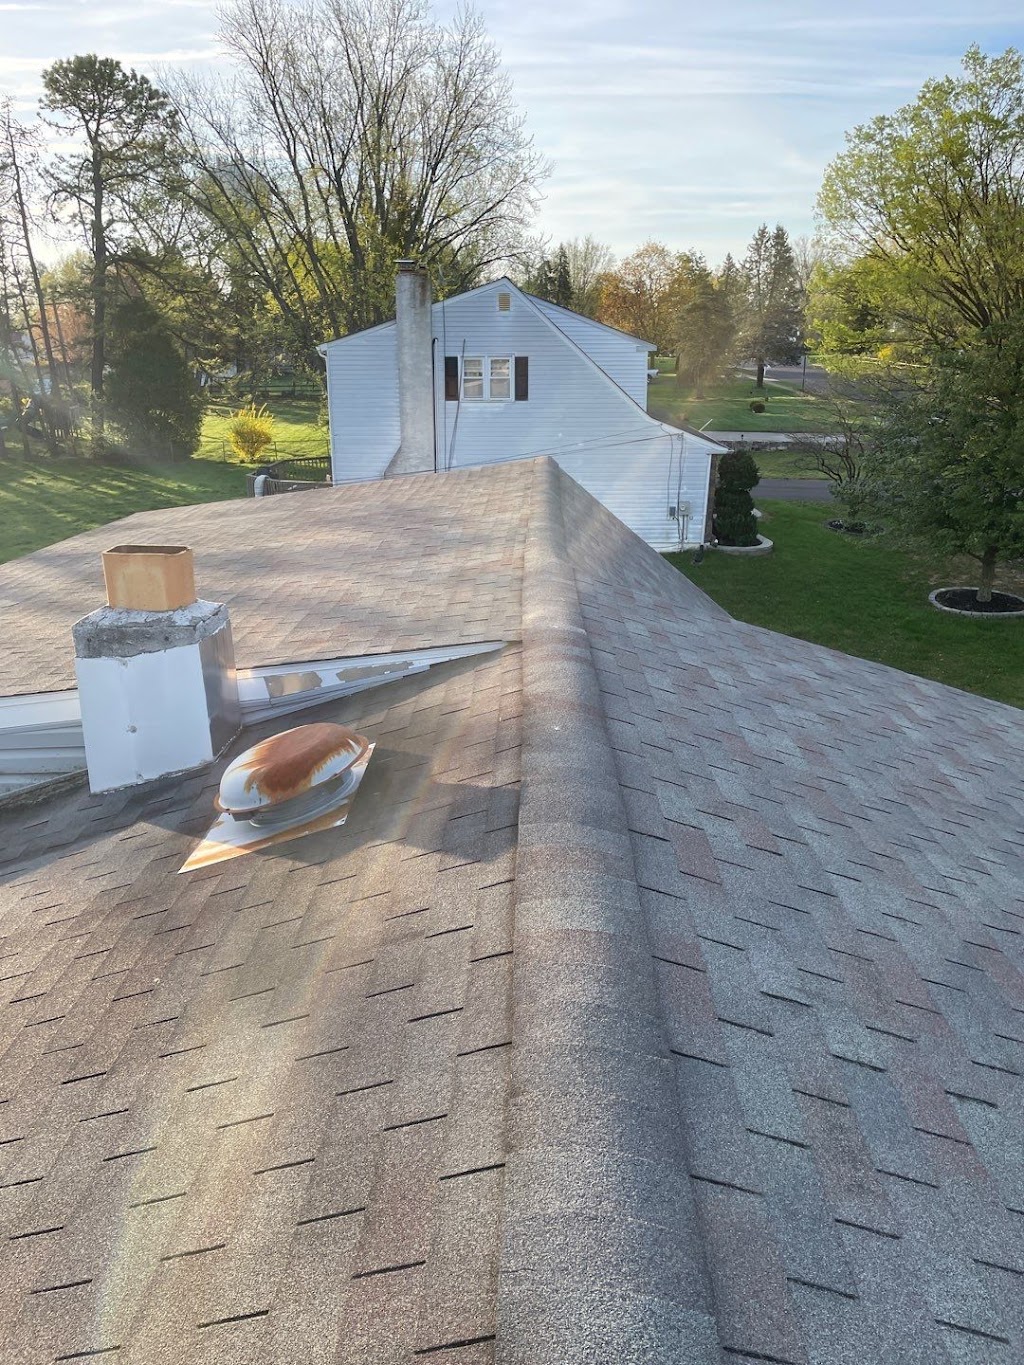 MLM Home Improvement & Roofing Company | 901 E 8th Ave, King of Prussia, PA 19406 | Phone: (484) 229-1462